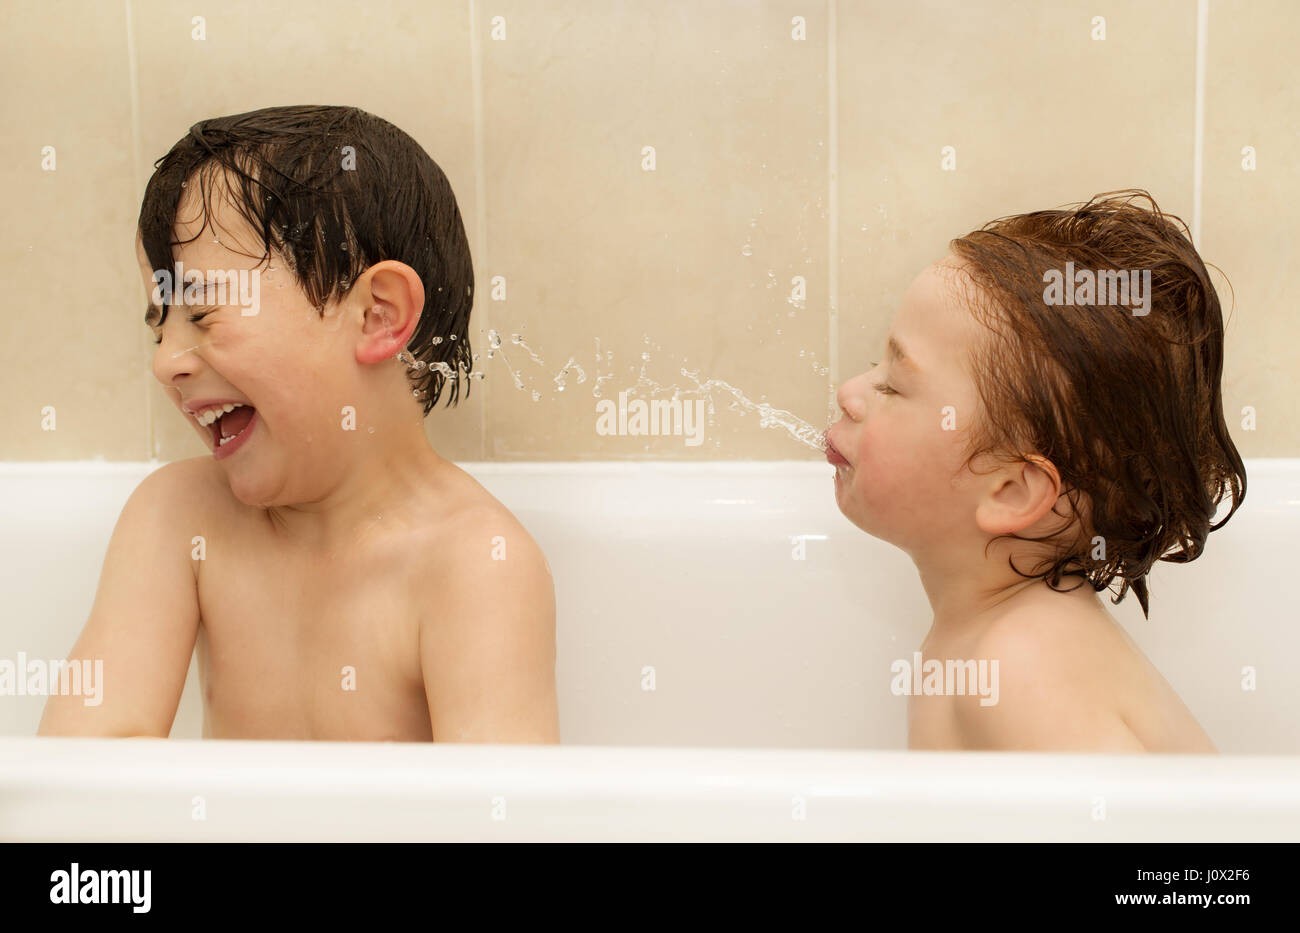 Two brother having a bath at home together. Stock Photo